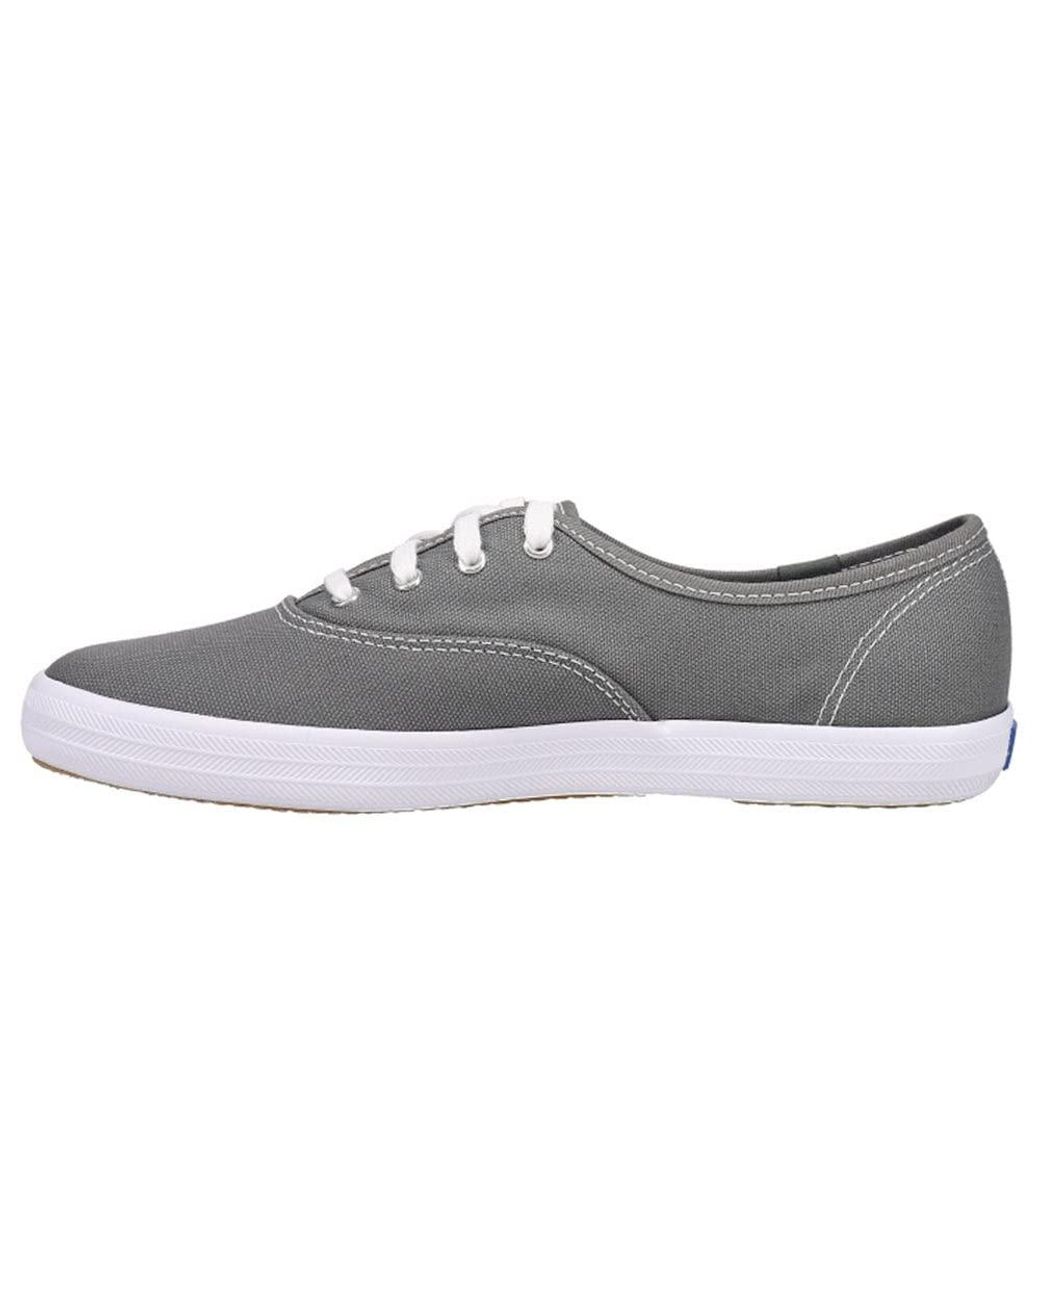 Keds Champion Original Canvas Lace-up Sneaker in Gray | Lyst